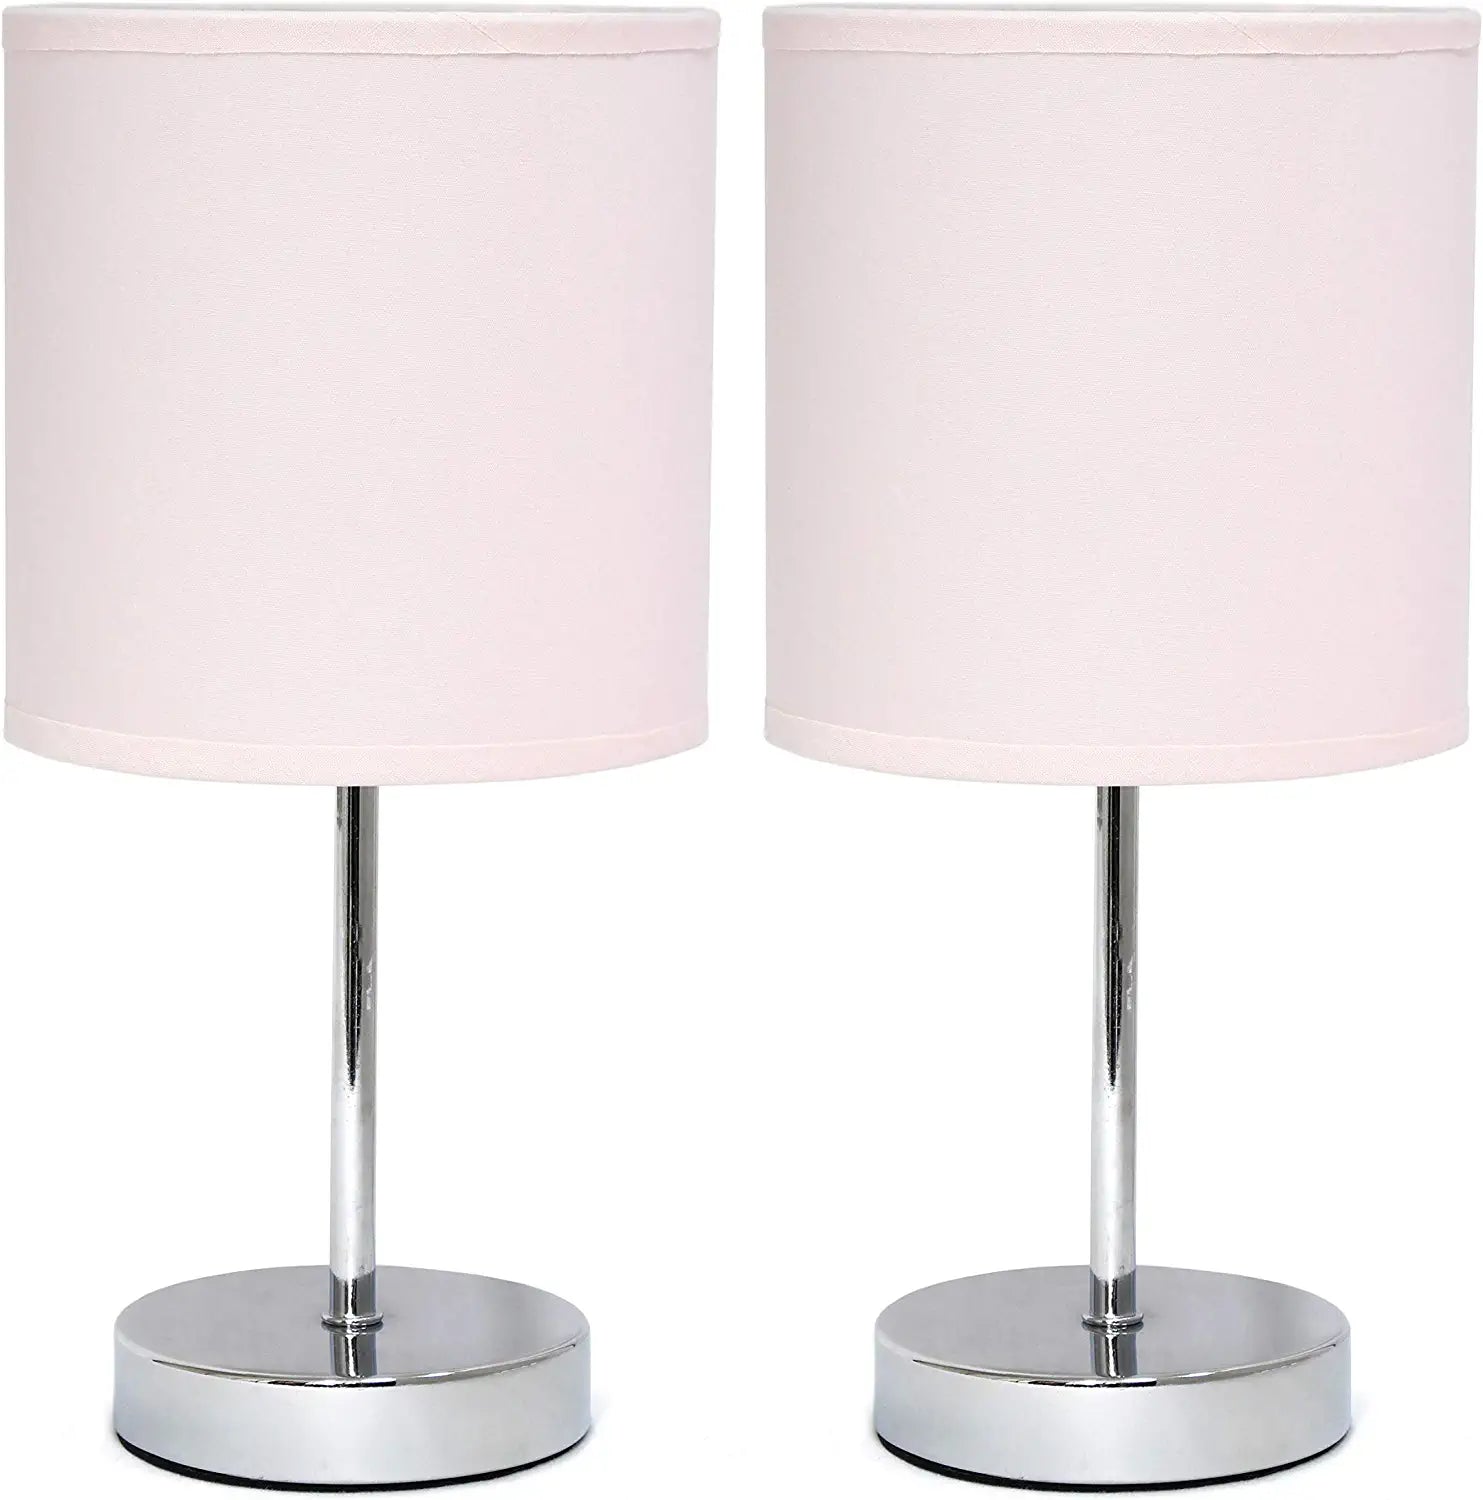 Simple Designs Chrome Mini Basic Table Lamp with Fabric Shade 2 Pack Set, Wine